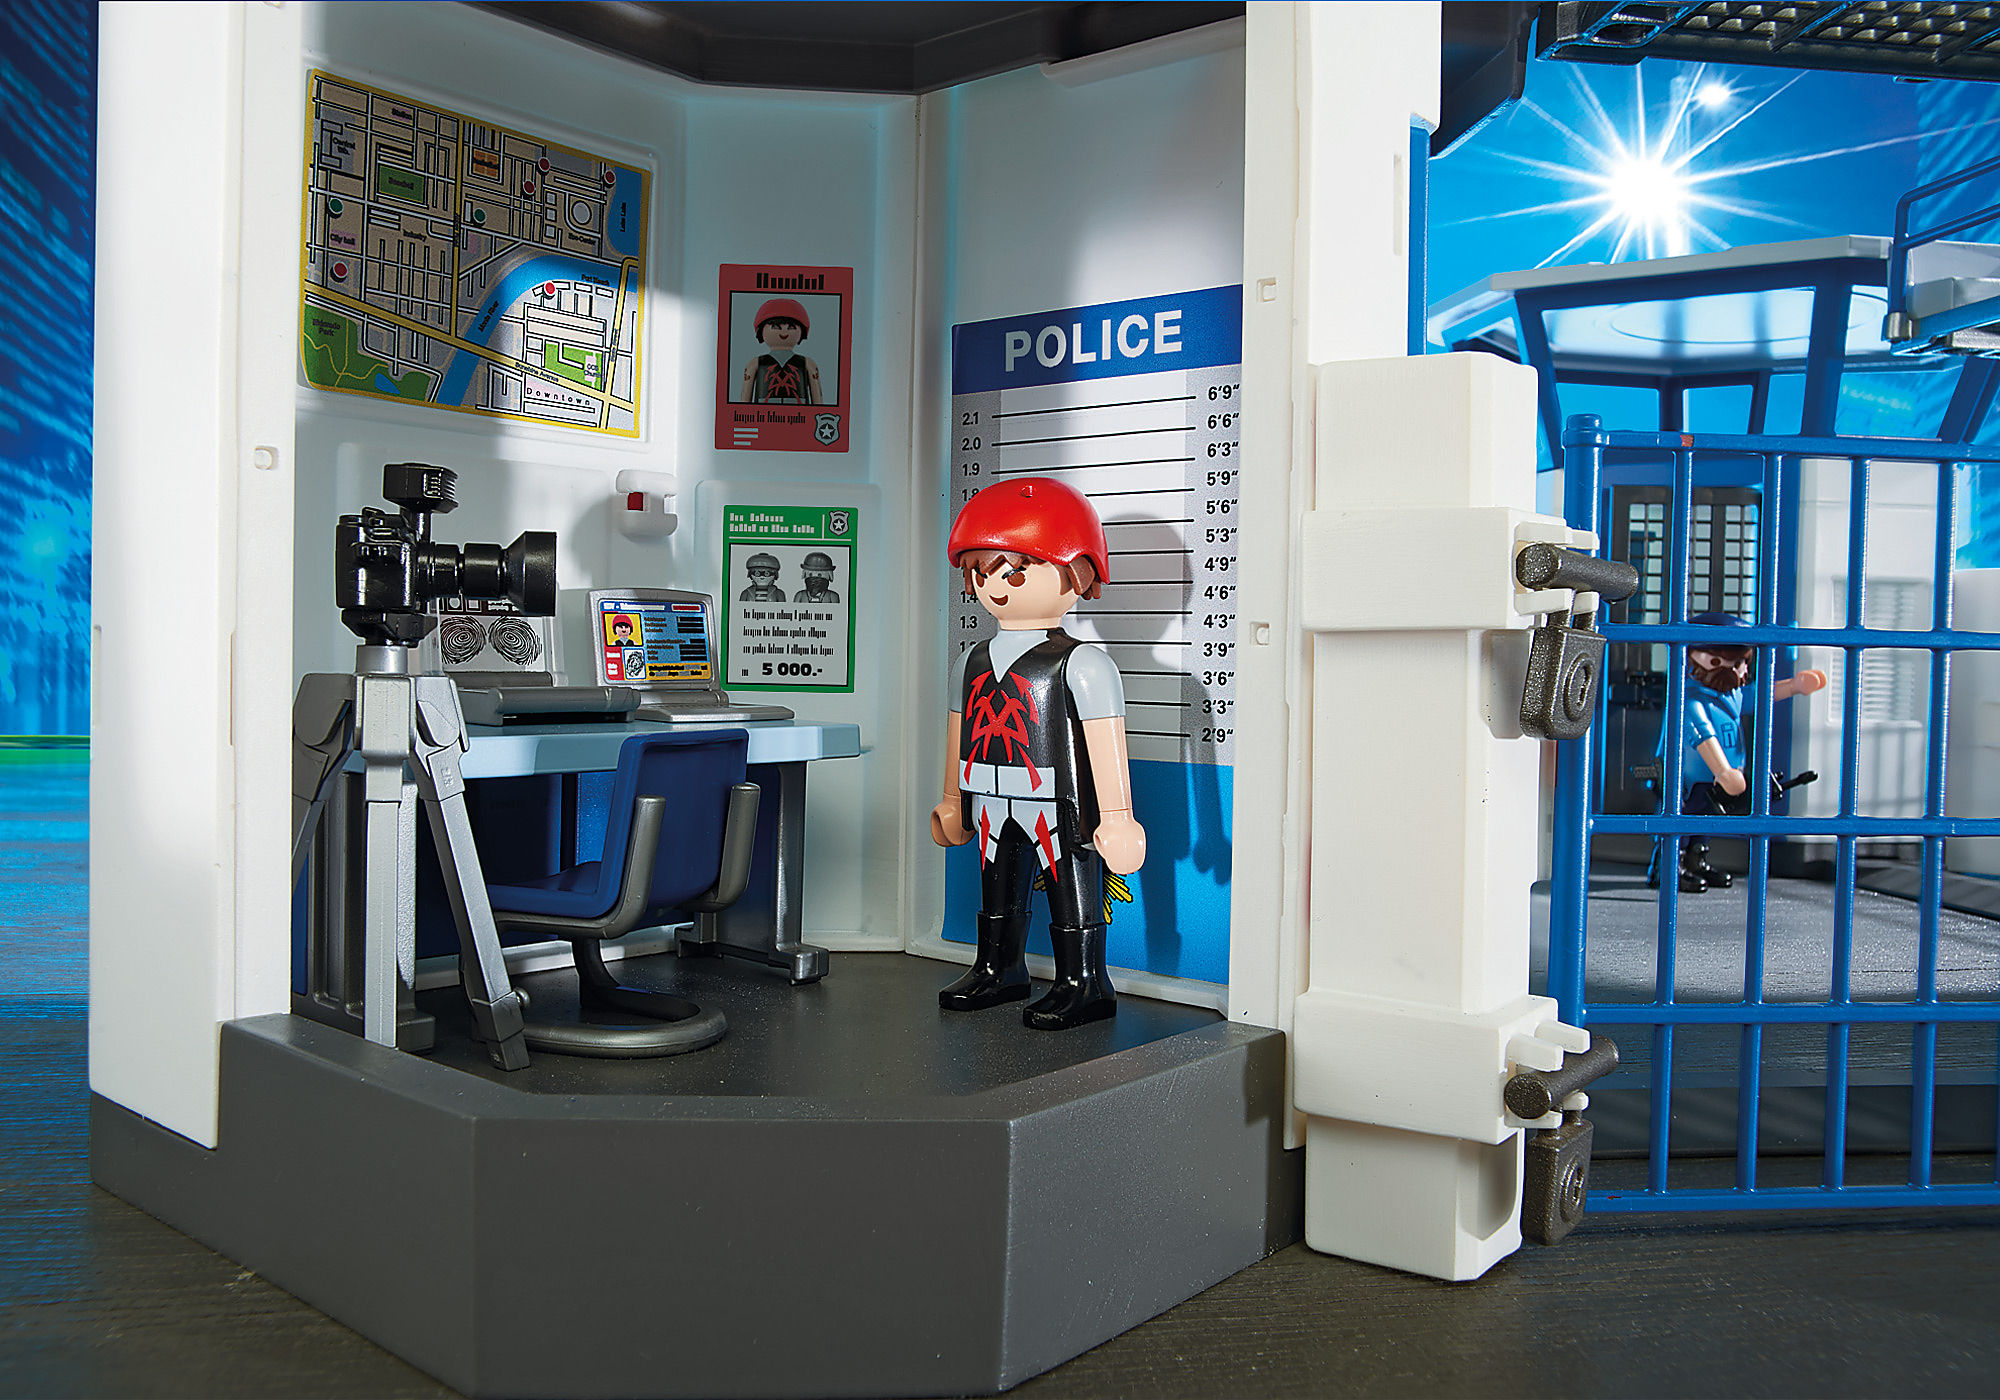 Playmobil City Action - Police: Escape From Prison - 70568 - 161